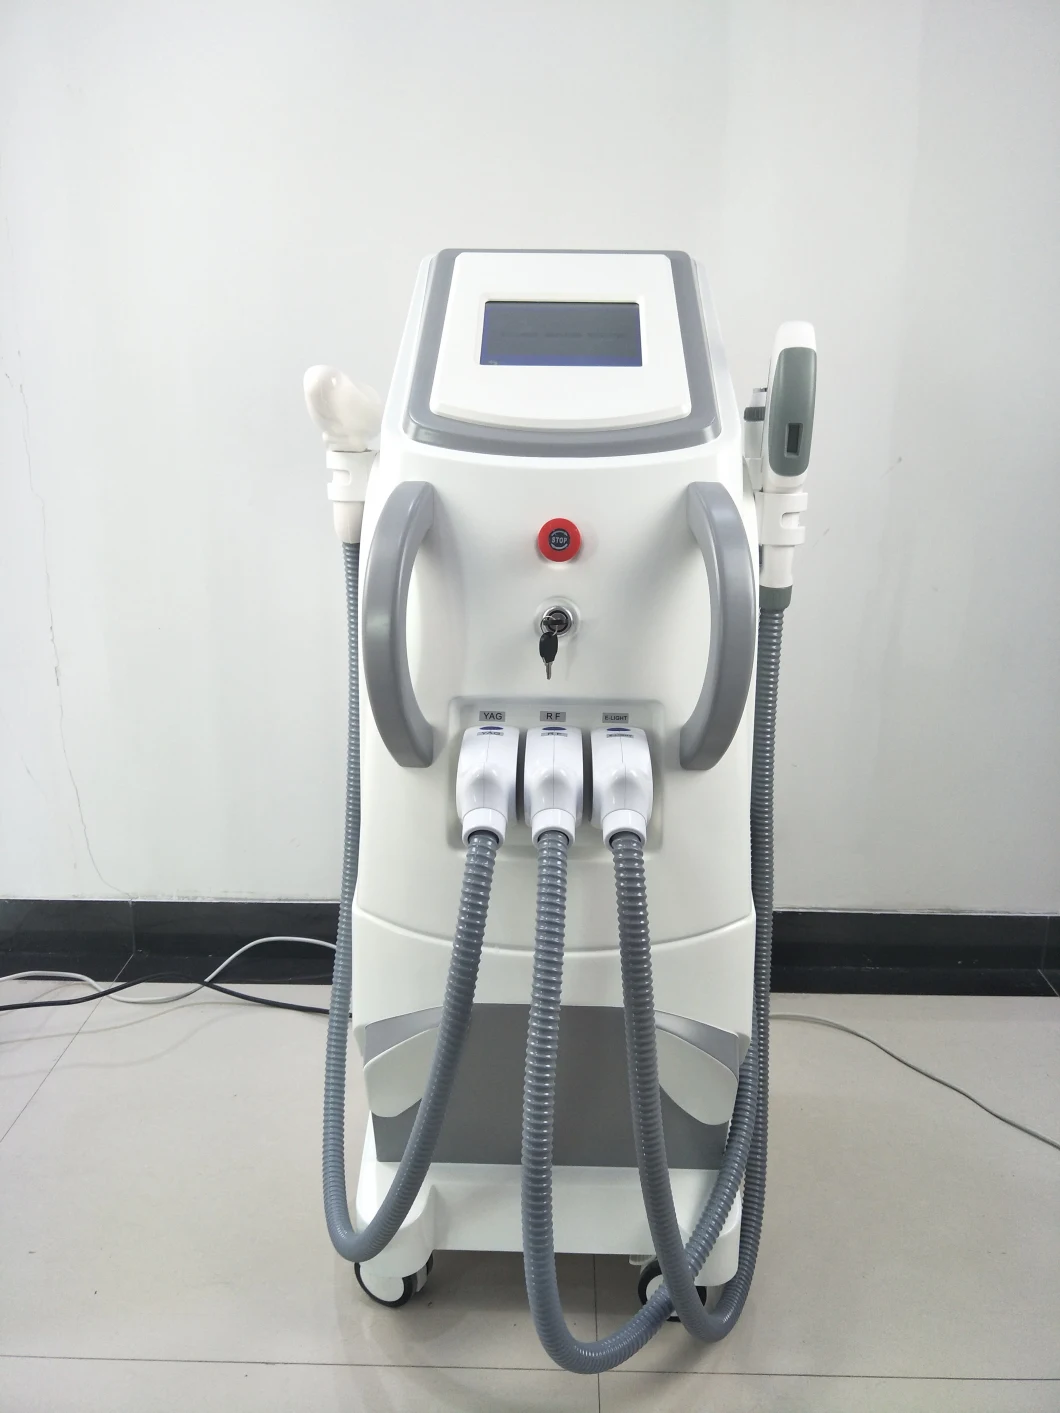 Multifunctional ND YAG Laser Eligh Shr Opt RF Machine for Hair Removal Tattoo Removal Skin Tightening